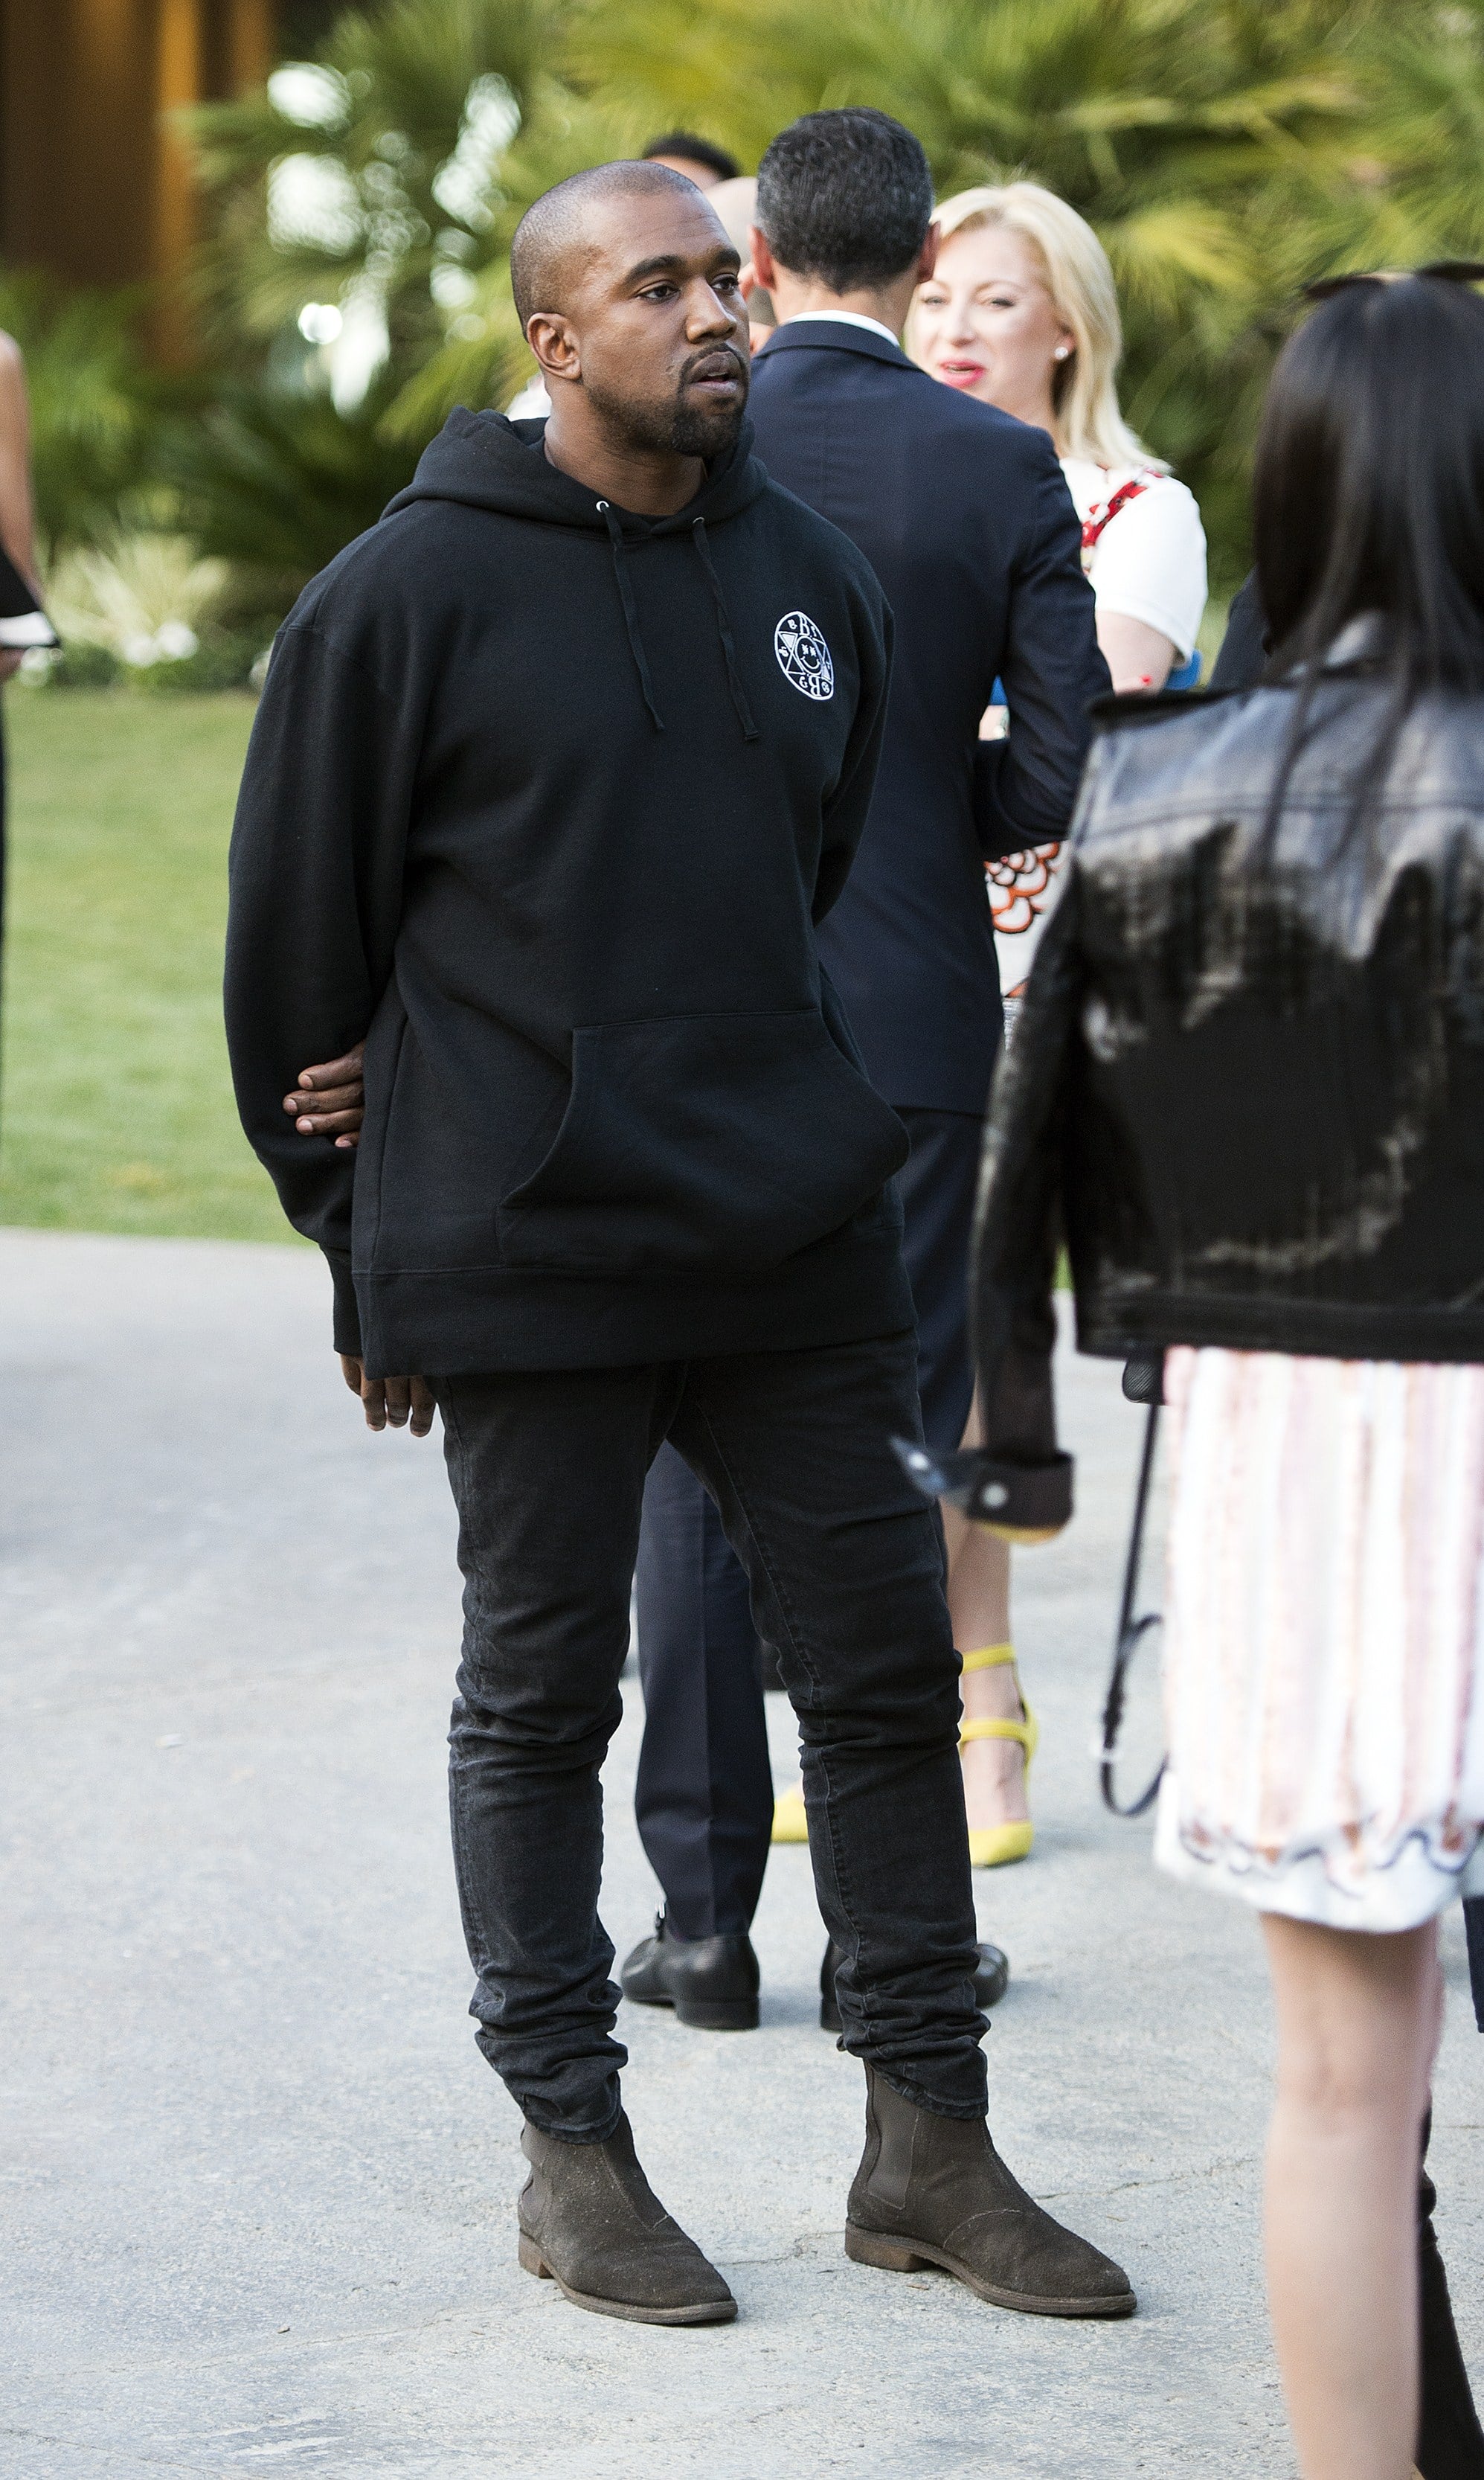 Louis Vuitton Cruise 2016 Show: Kanye West, Michelle Williams in